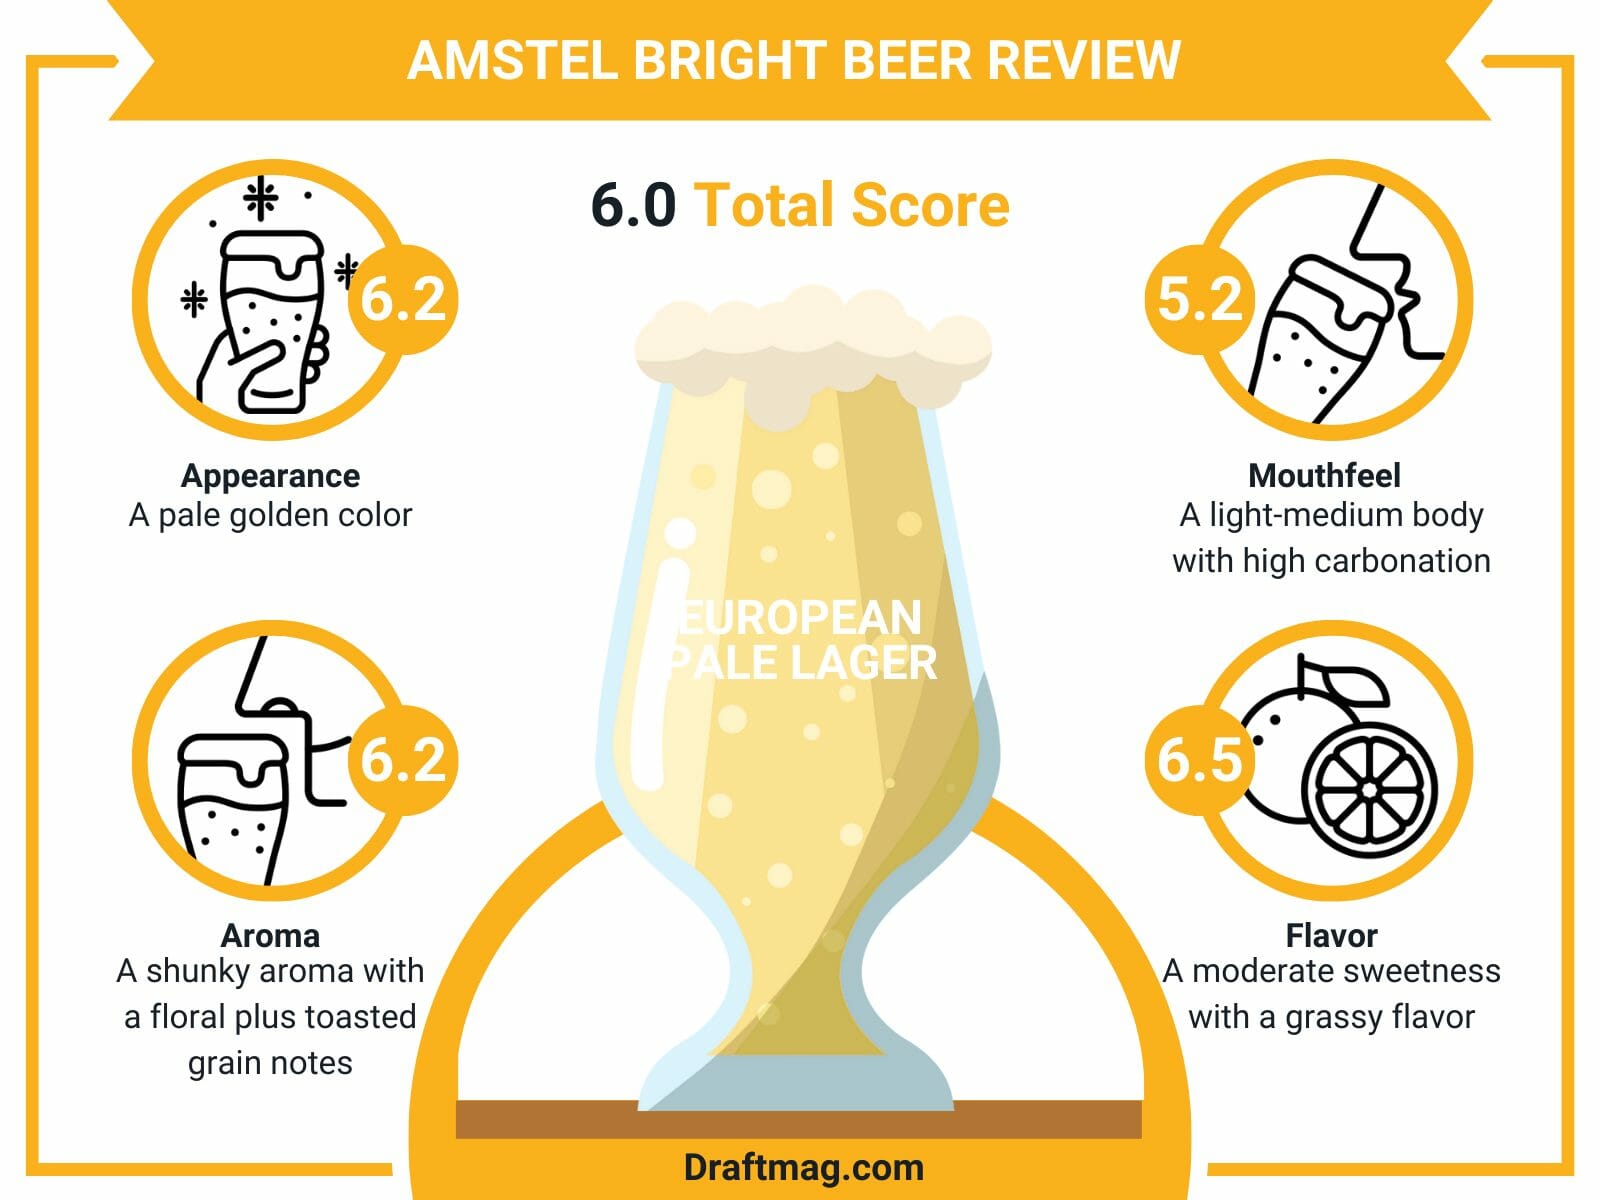 Amstel bright beer review infographic